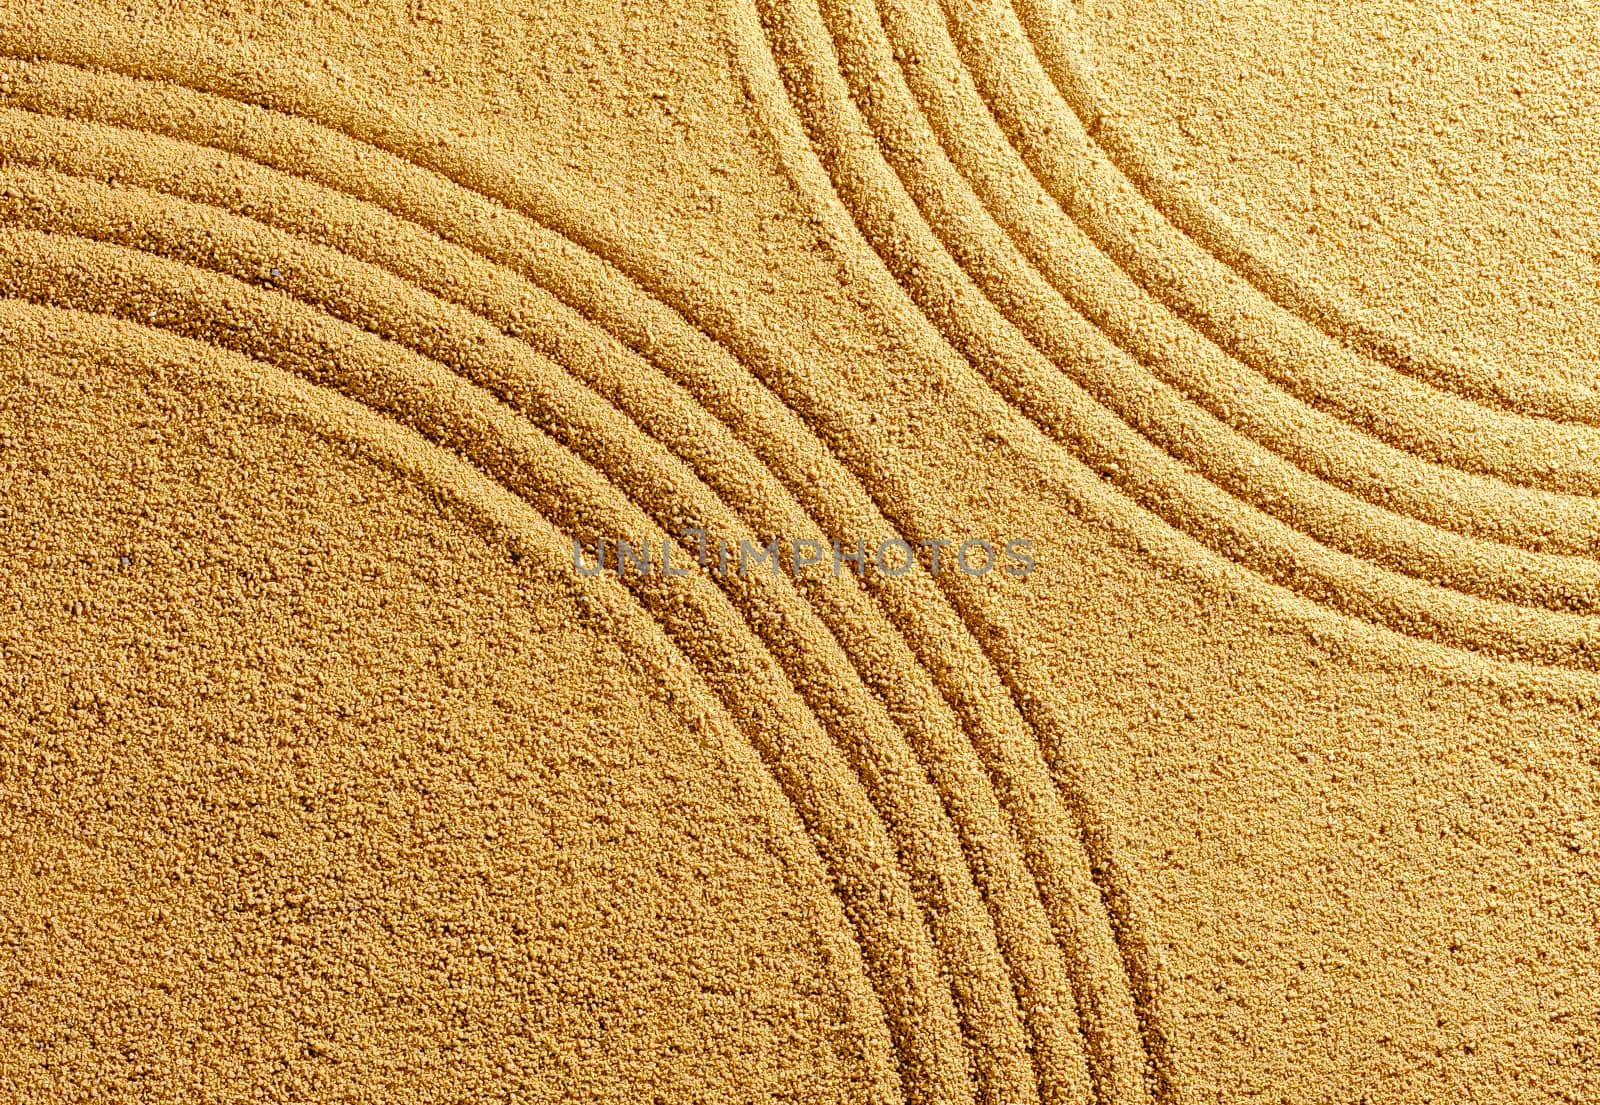 Two arcs on yellow sand background summer beach warmth for harmony and balance of spirit.